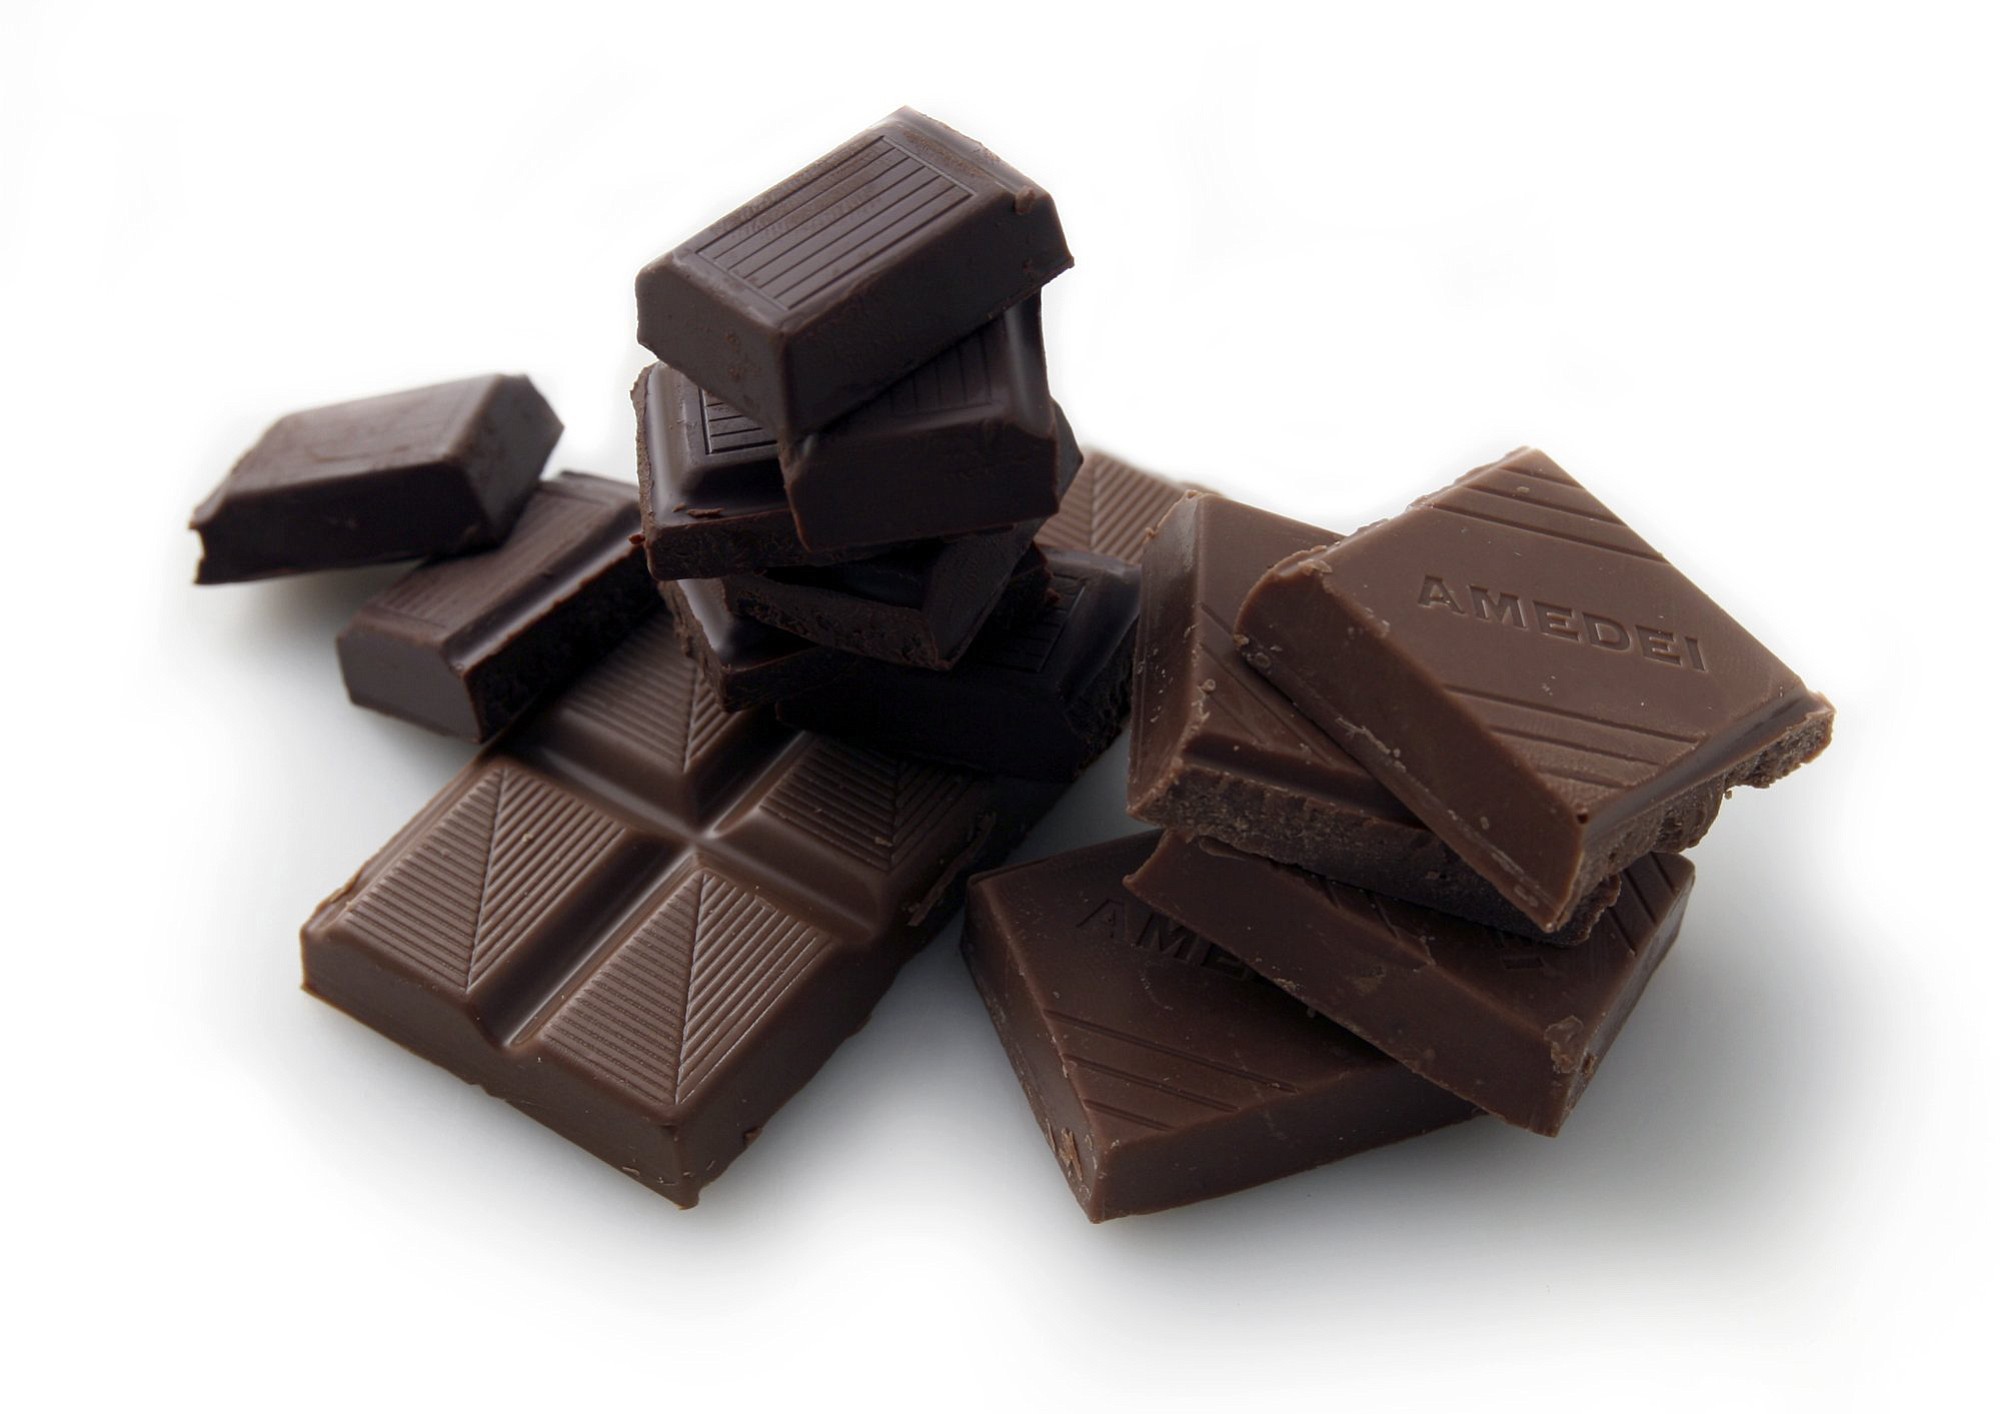 A study published in the journal Neurology indicates that chocolate may help improve brain health and thinking skills in the elderly.